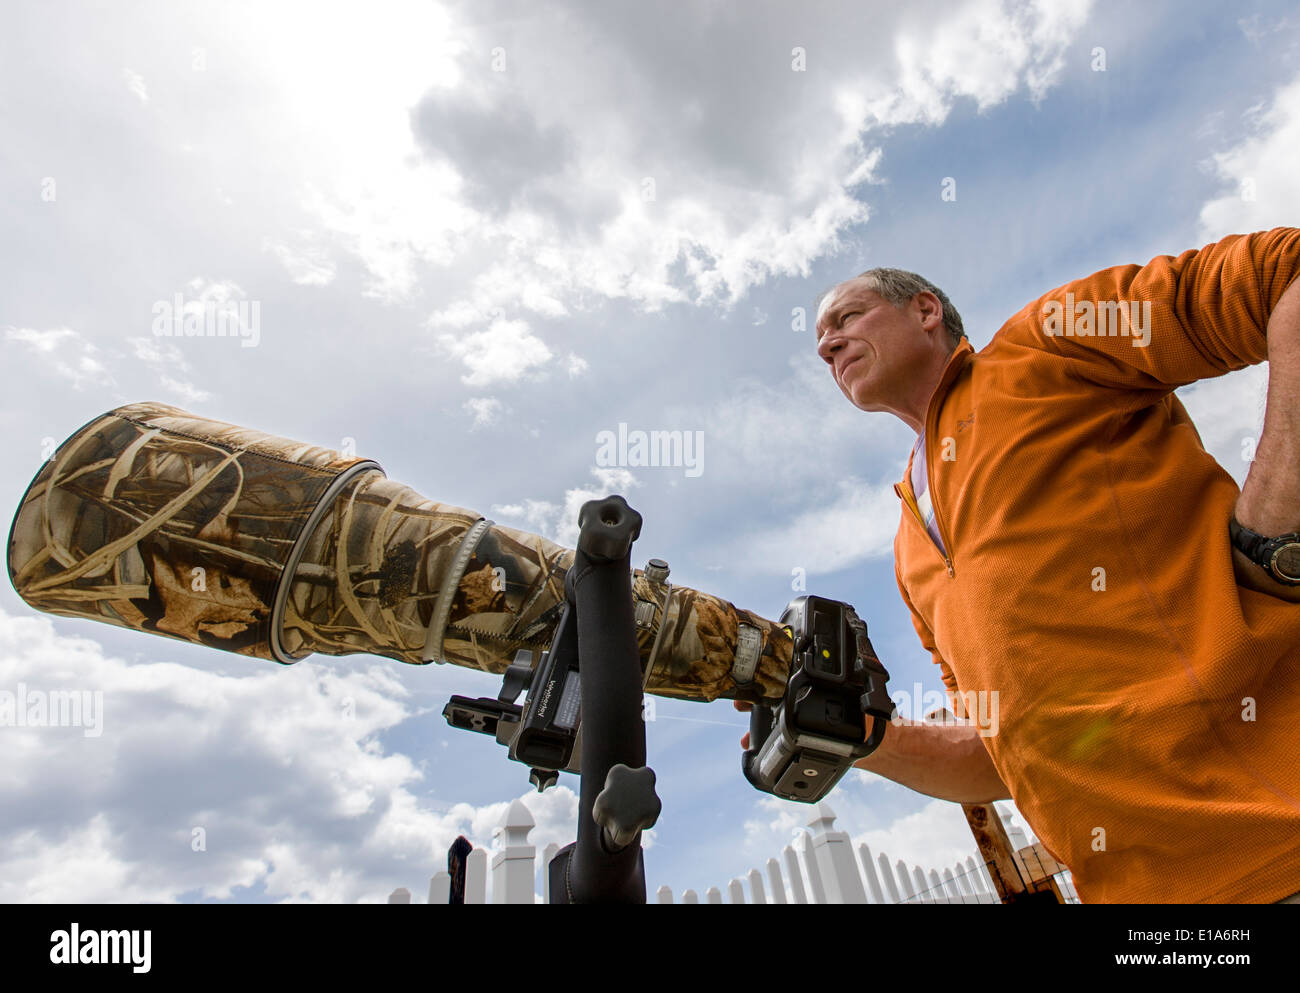 Wildlife photographer H. Mark Weidman working with a large telephoto lens Stock Photo